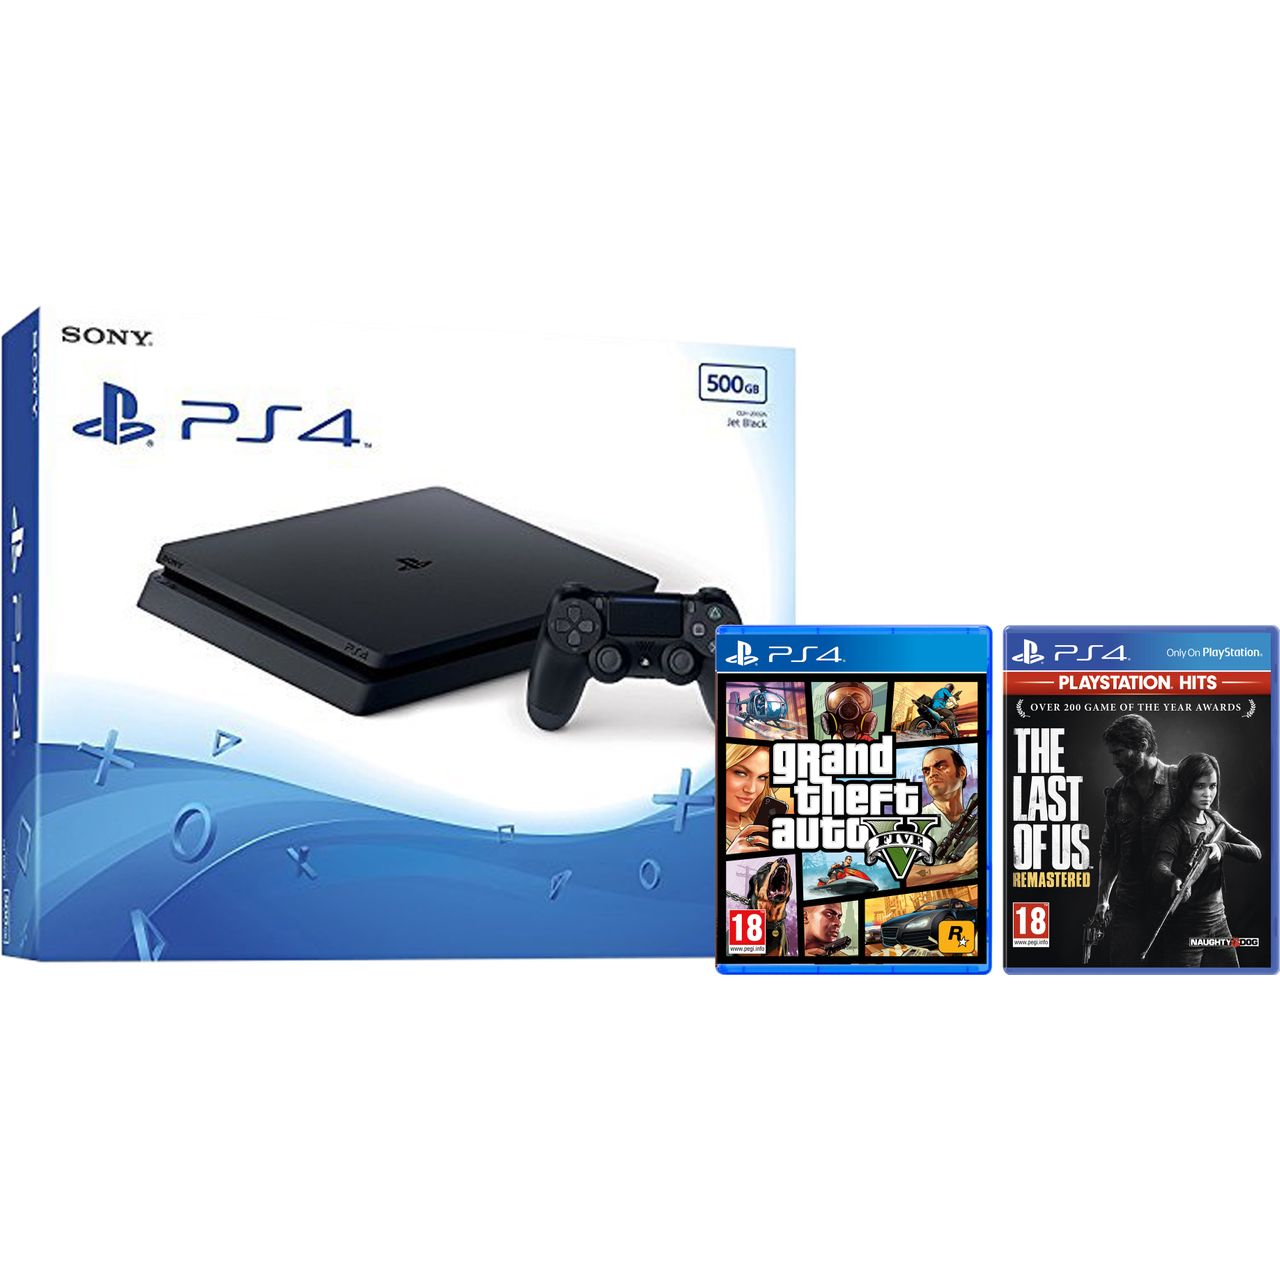 PlayStation 4 500GB with The Last Of Us and GTA V (Disc) Review